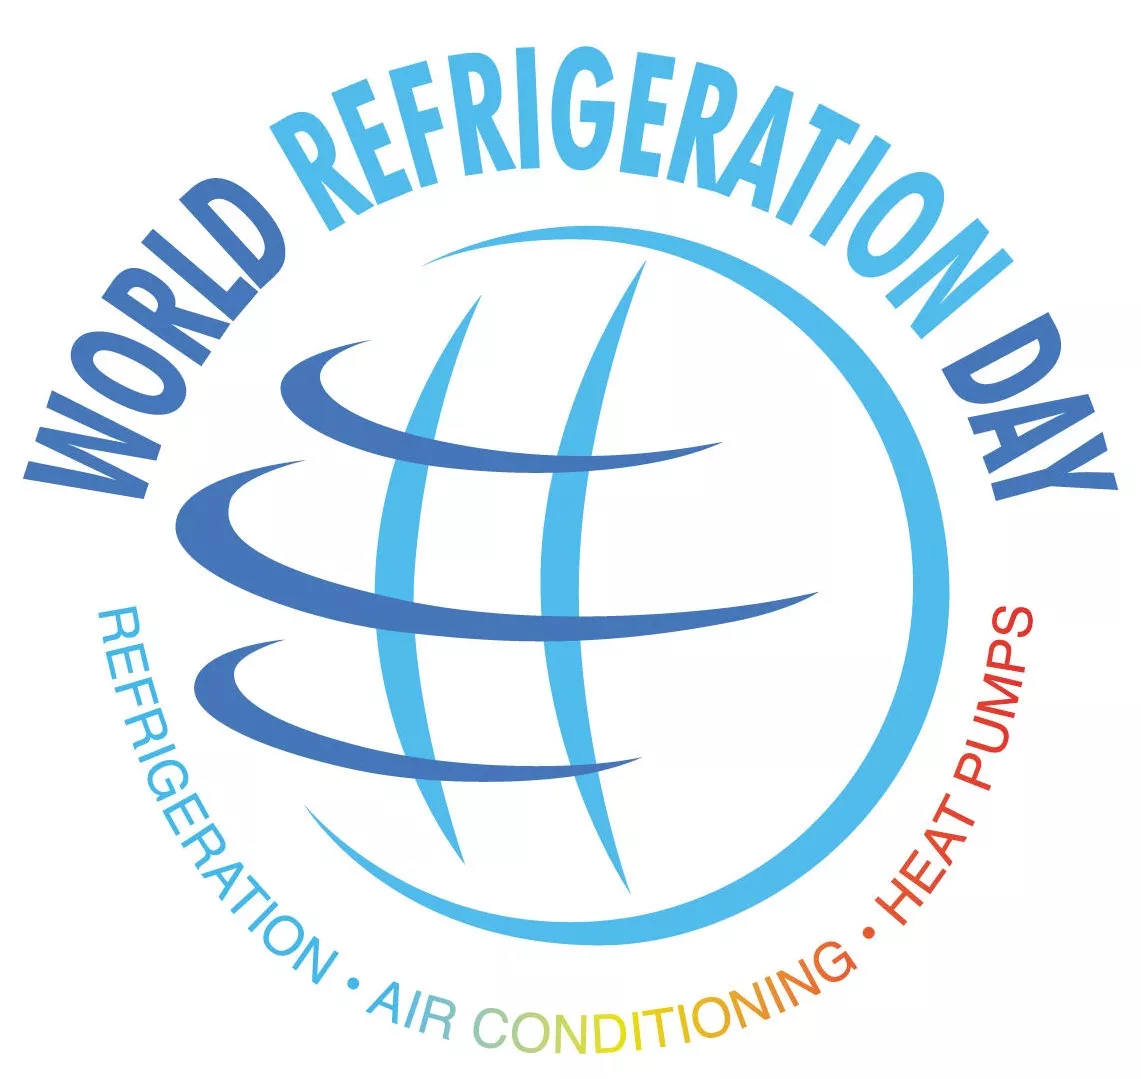 Today is celebrated World Refrigeration Day